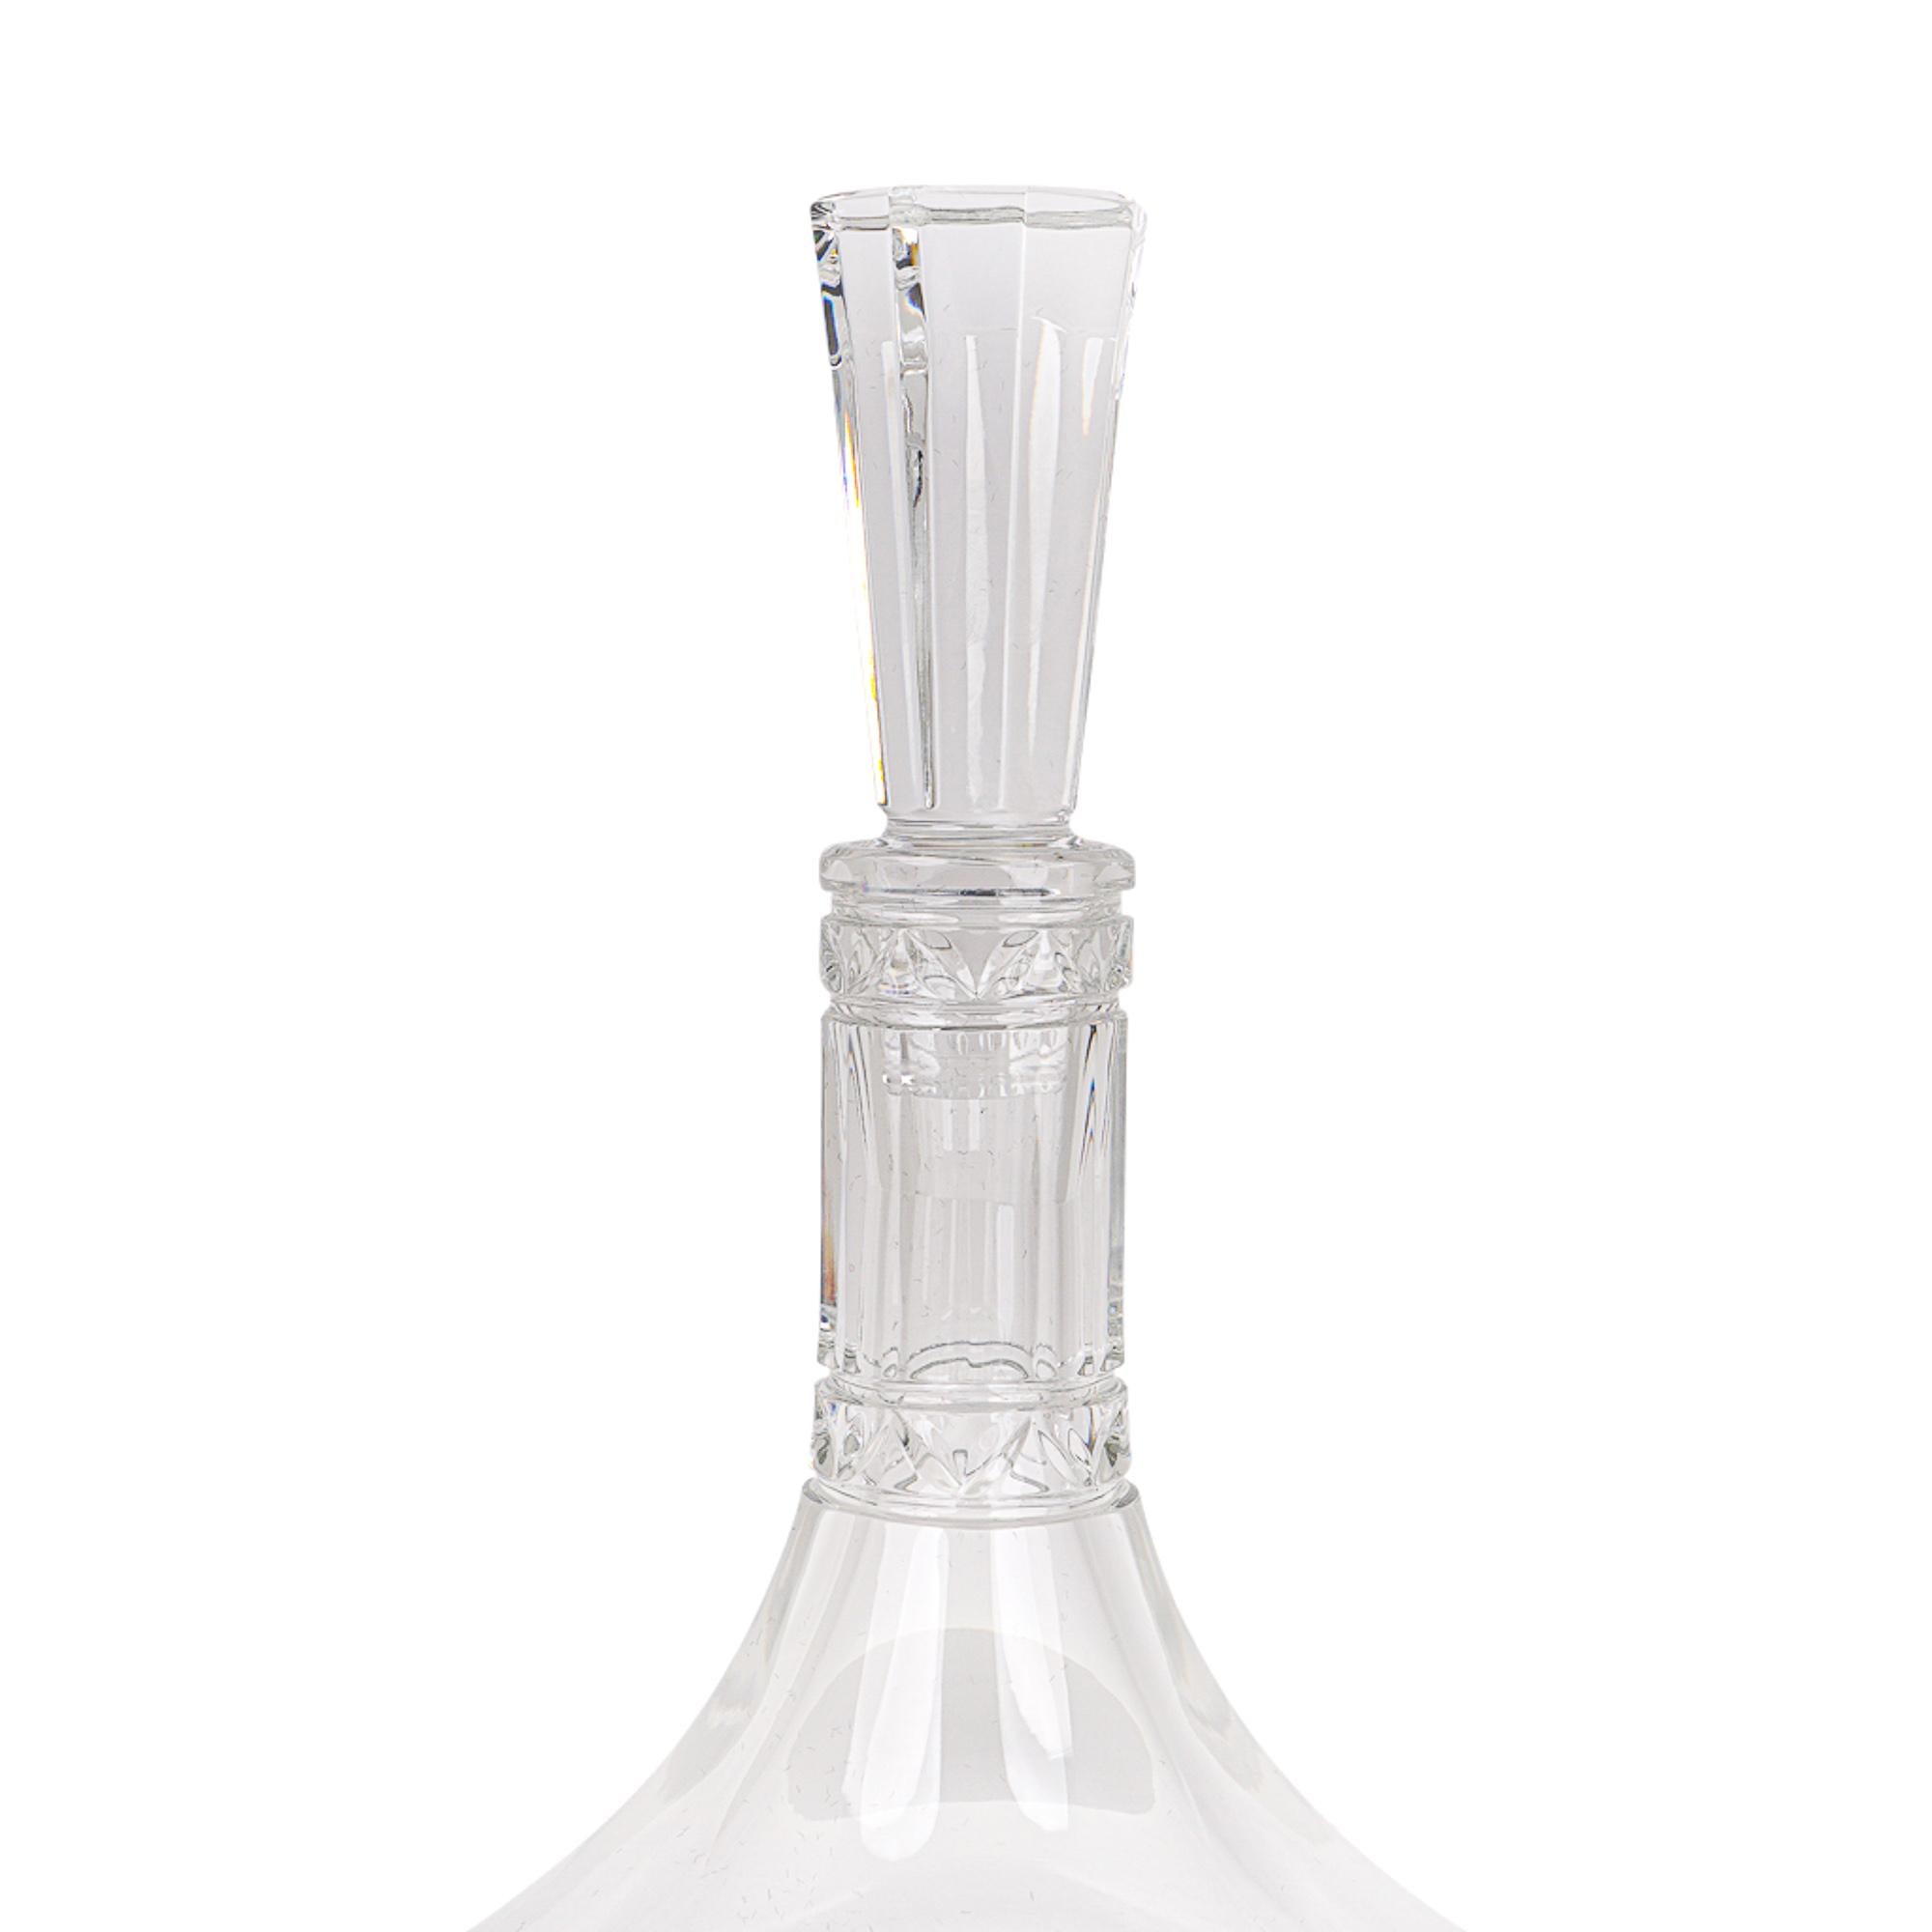 Mightychic offers an Hermes Iskender crystal wine decanter.
Modern and elegant with faceted details.
Octagonal faceted stopper.
Cristal Hermes Paris acid etched on bottom.
Comes with signature Saint Louis box.
New or Store Fresh Condition.
final